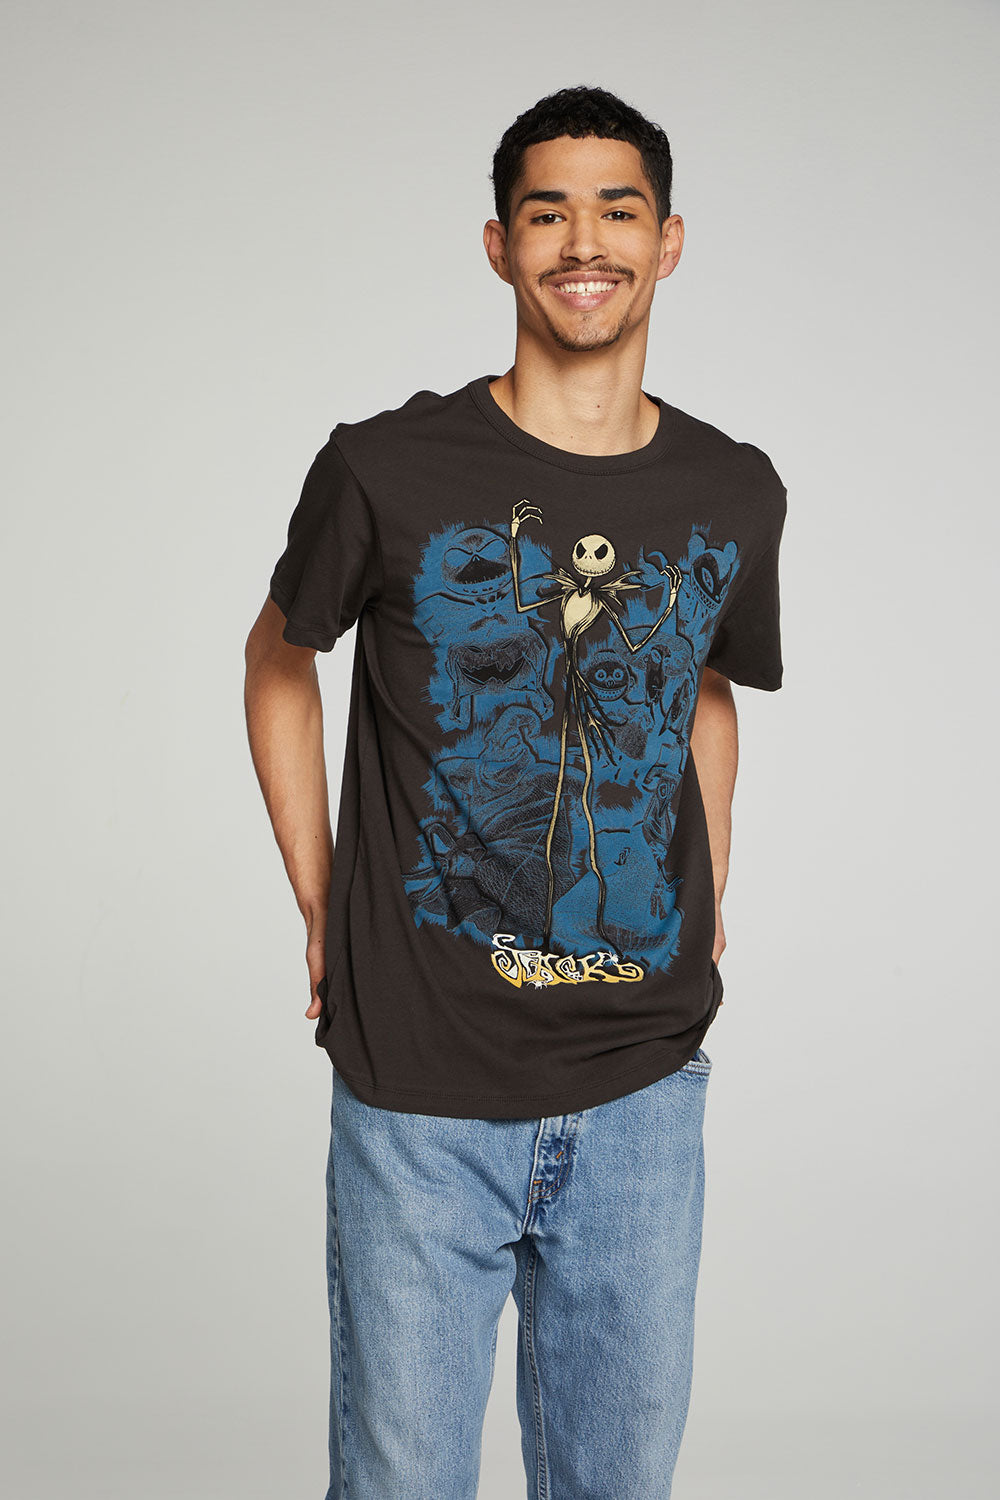 The Nightmare Before Christmas - Jack MENS chaserbrand